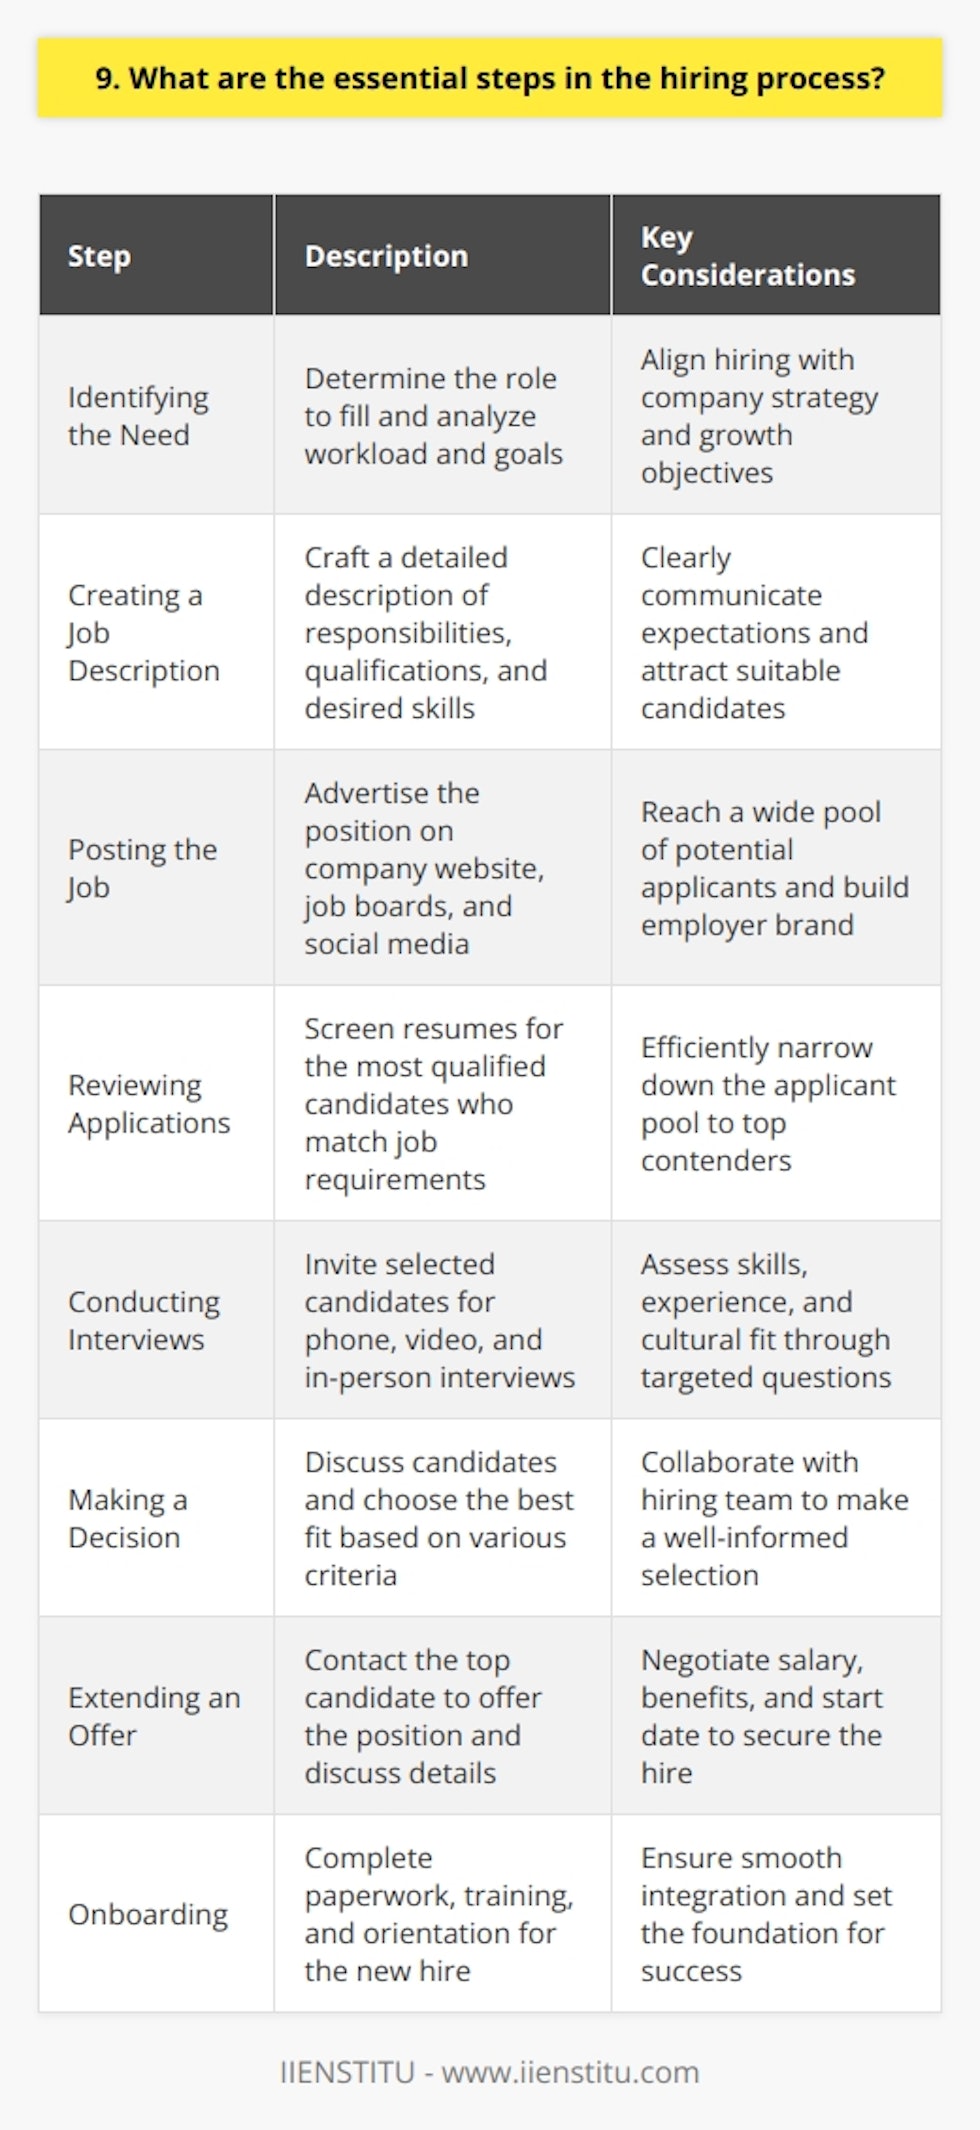 The essential steps in the hiring process are crucial for finding the right candidate for a job. Heres what Ive learned from my own experiences and observations: Identifying the Need First, the company must determine what role they need to fill and why. This involves analyzing workload and goals. Creating a Job Description Next, HR or the hiring manager crafts a detailed description of the positions responsibilities, qualifications, and desired skills. Posting the Job The job ad is posted on the company website, job boards, and social media to attract a pool of candidates. Reviewing Applications As resumes come in, HR screens them for the most qualified applicants who match the job requirements well. Conducting Interviews Selected candidates are invited for interviews, usually starting with a phone or video screening, then in-person meetings. Making a Decision After interviews, the hiring team discusses the candidates and chooses the best fit based on skills, experience, and personality. Extending an Offer HR contacts the top candidate to offer them the position, discuss salary and benefits, and agree on a start date. Onboarding Finally, the new hire completes paperwork, training, and orientation to integrate into the company and begin contributing. I find the hiring process fascinating because its a bit like matchmaking - linking the right people to the right roles. When it works well, everyone benefits. The company gains a valuable employee, the new hire finds a fulfilling job, and the team gets a strong new member. It can be a long road, but so worthwhile in the end.